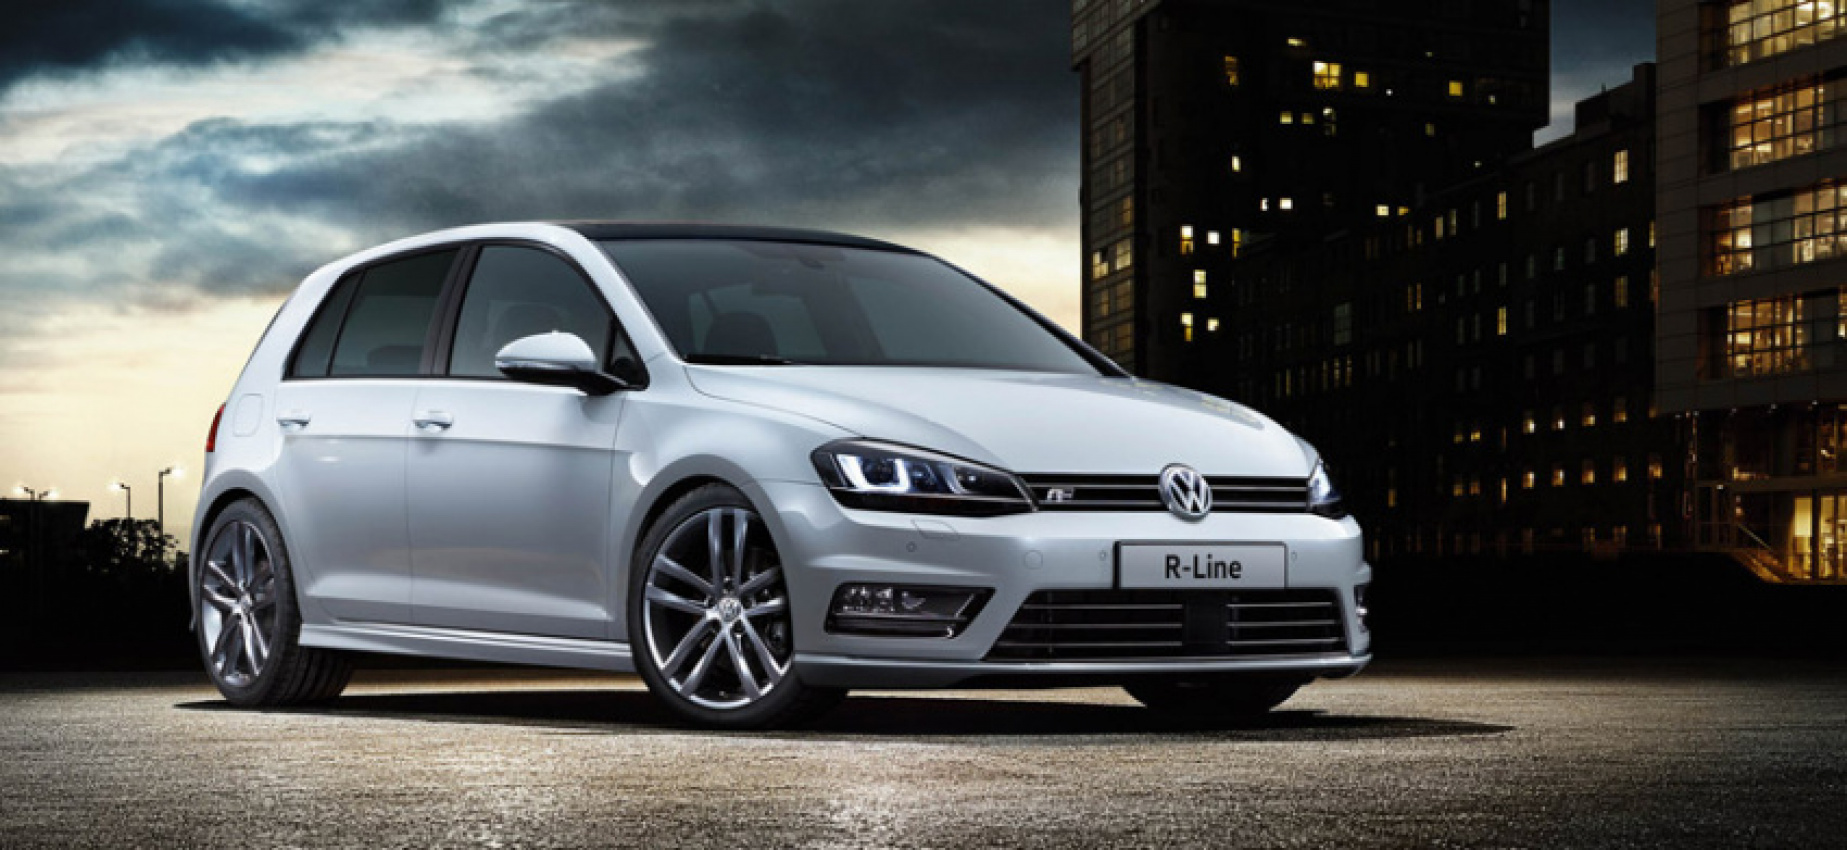 autos, cars, volkswagen, volkswagen has great gifts for the polo, golf gt and r-line, and passat models